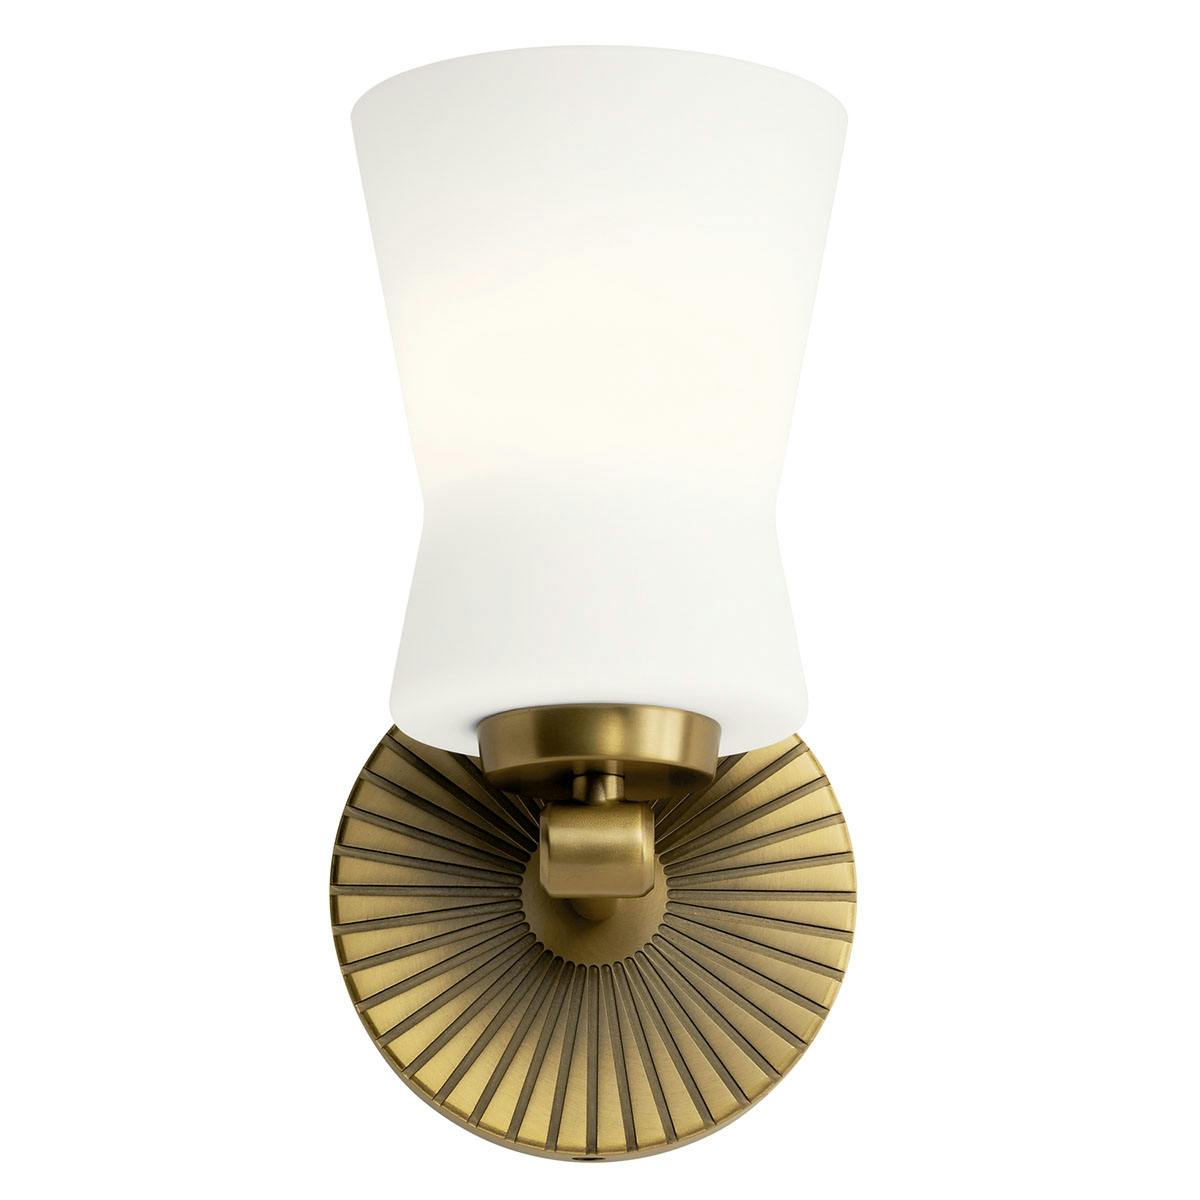 Front view of the Brianne 9.5" 1 Light Sconce Brass on a white background